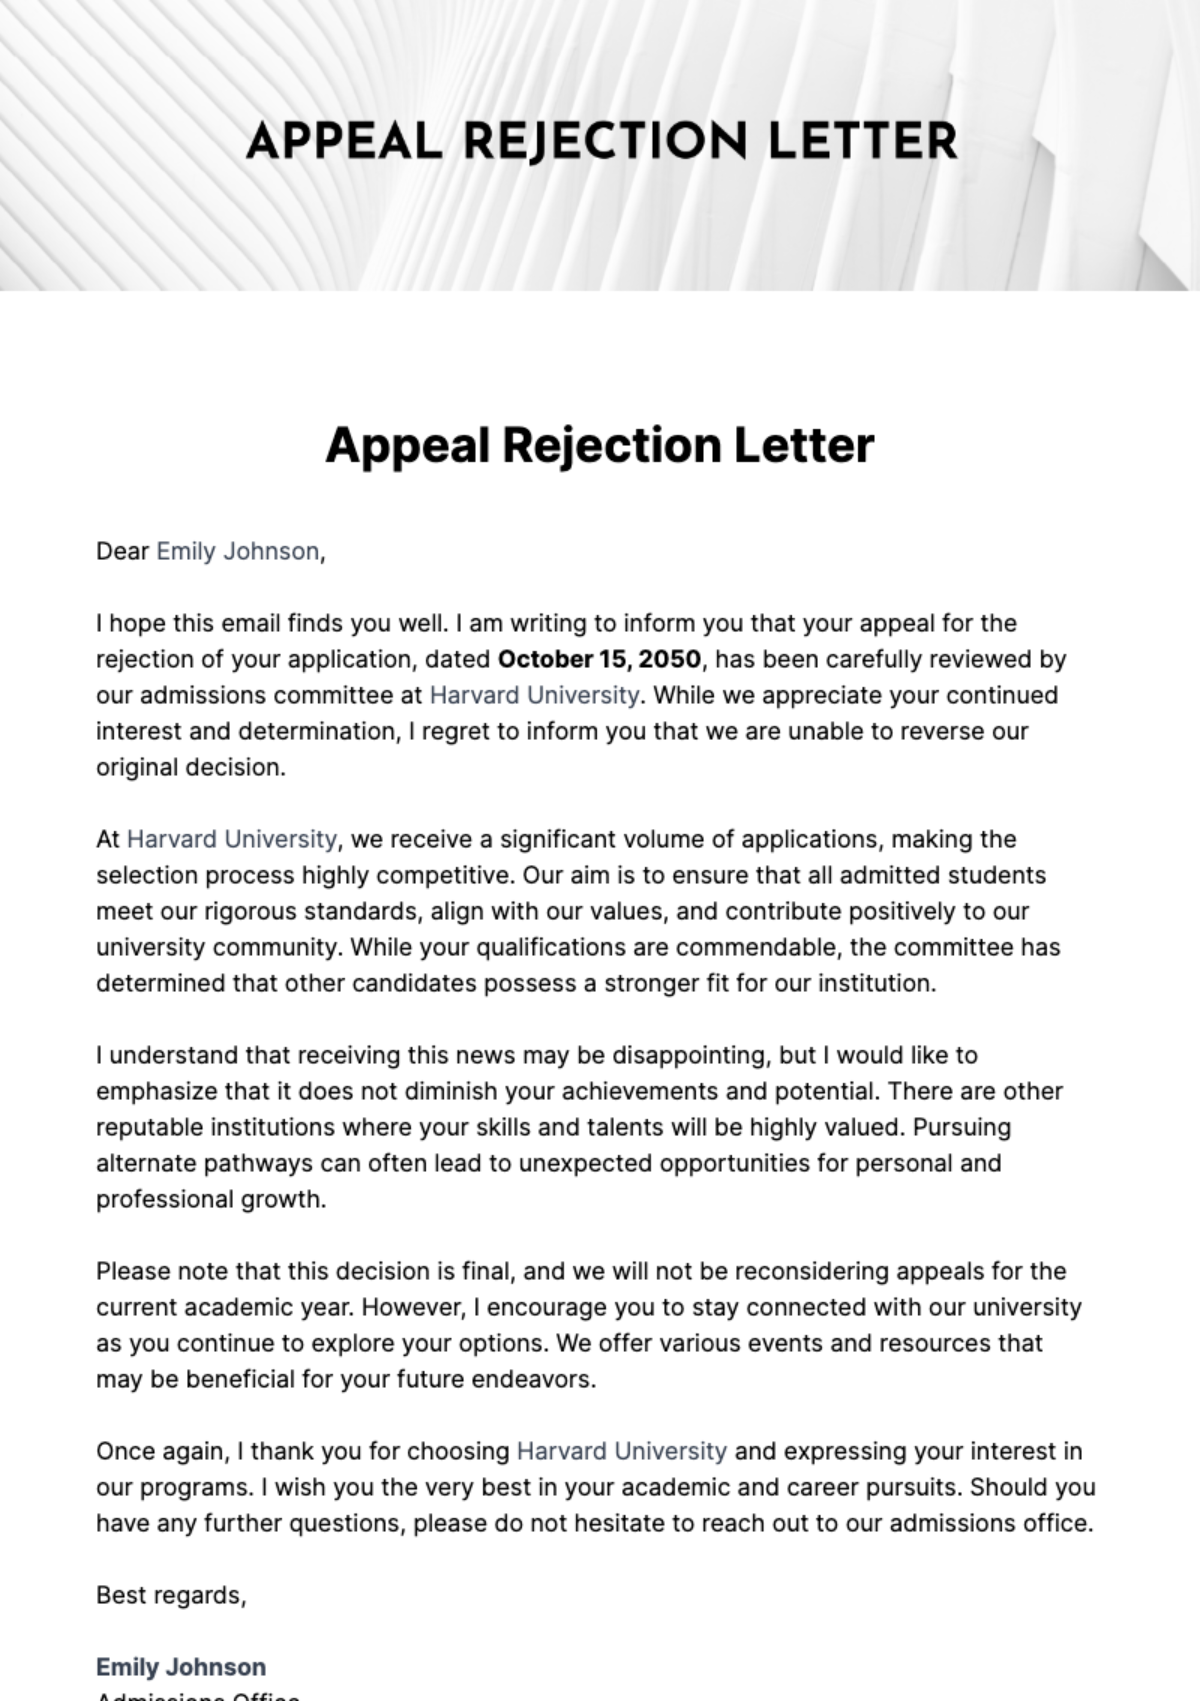 Appeal Rejection Letter Template